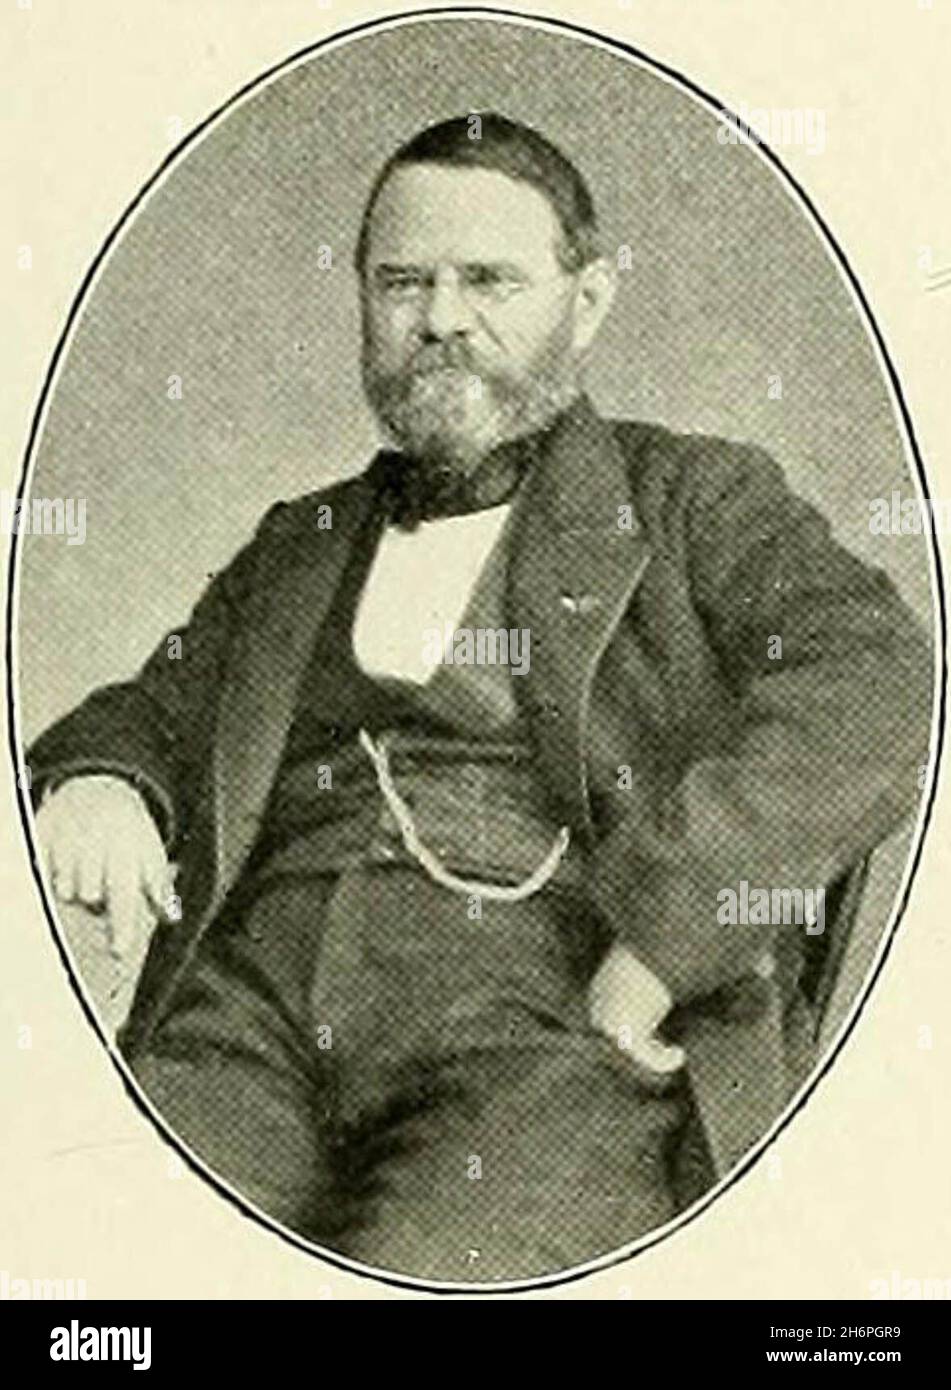 Justus Carl Hasskarl (6 December 1811 – 5 January 1894) was a German explorer and botanist specializing in Pteridophytes, Bryophytes and Spermatophytes. Stock Photo